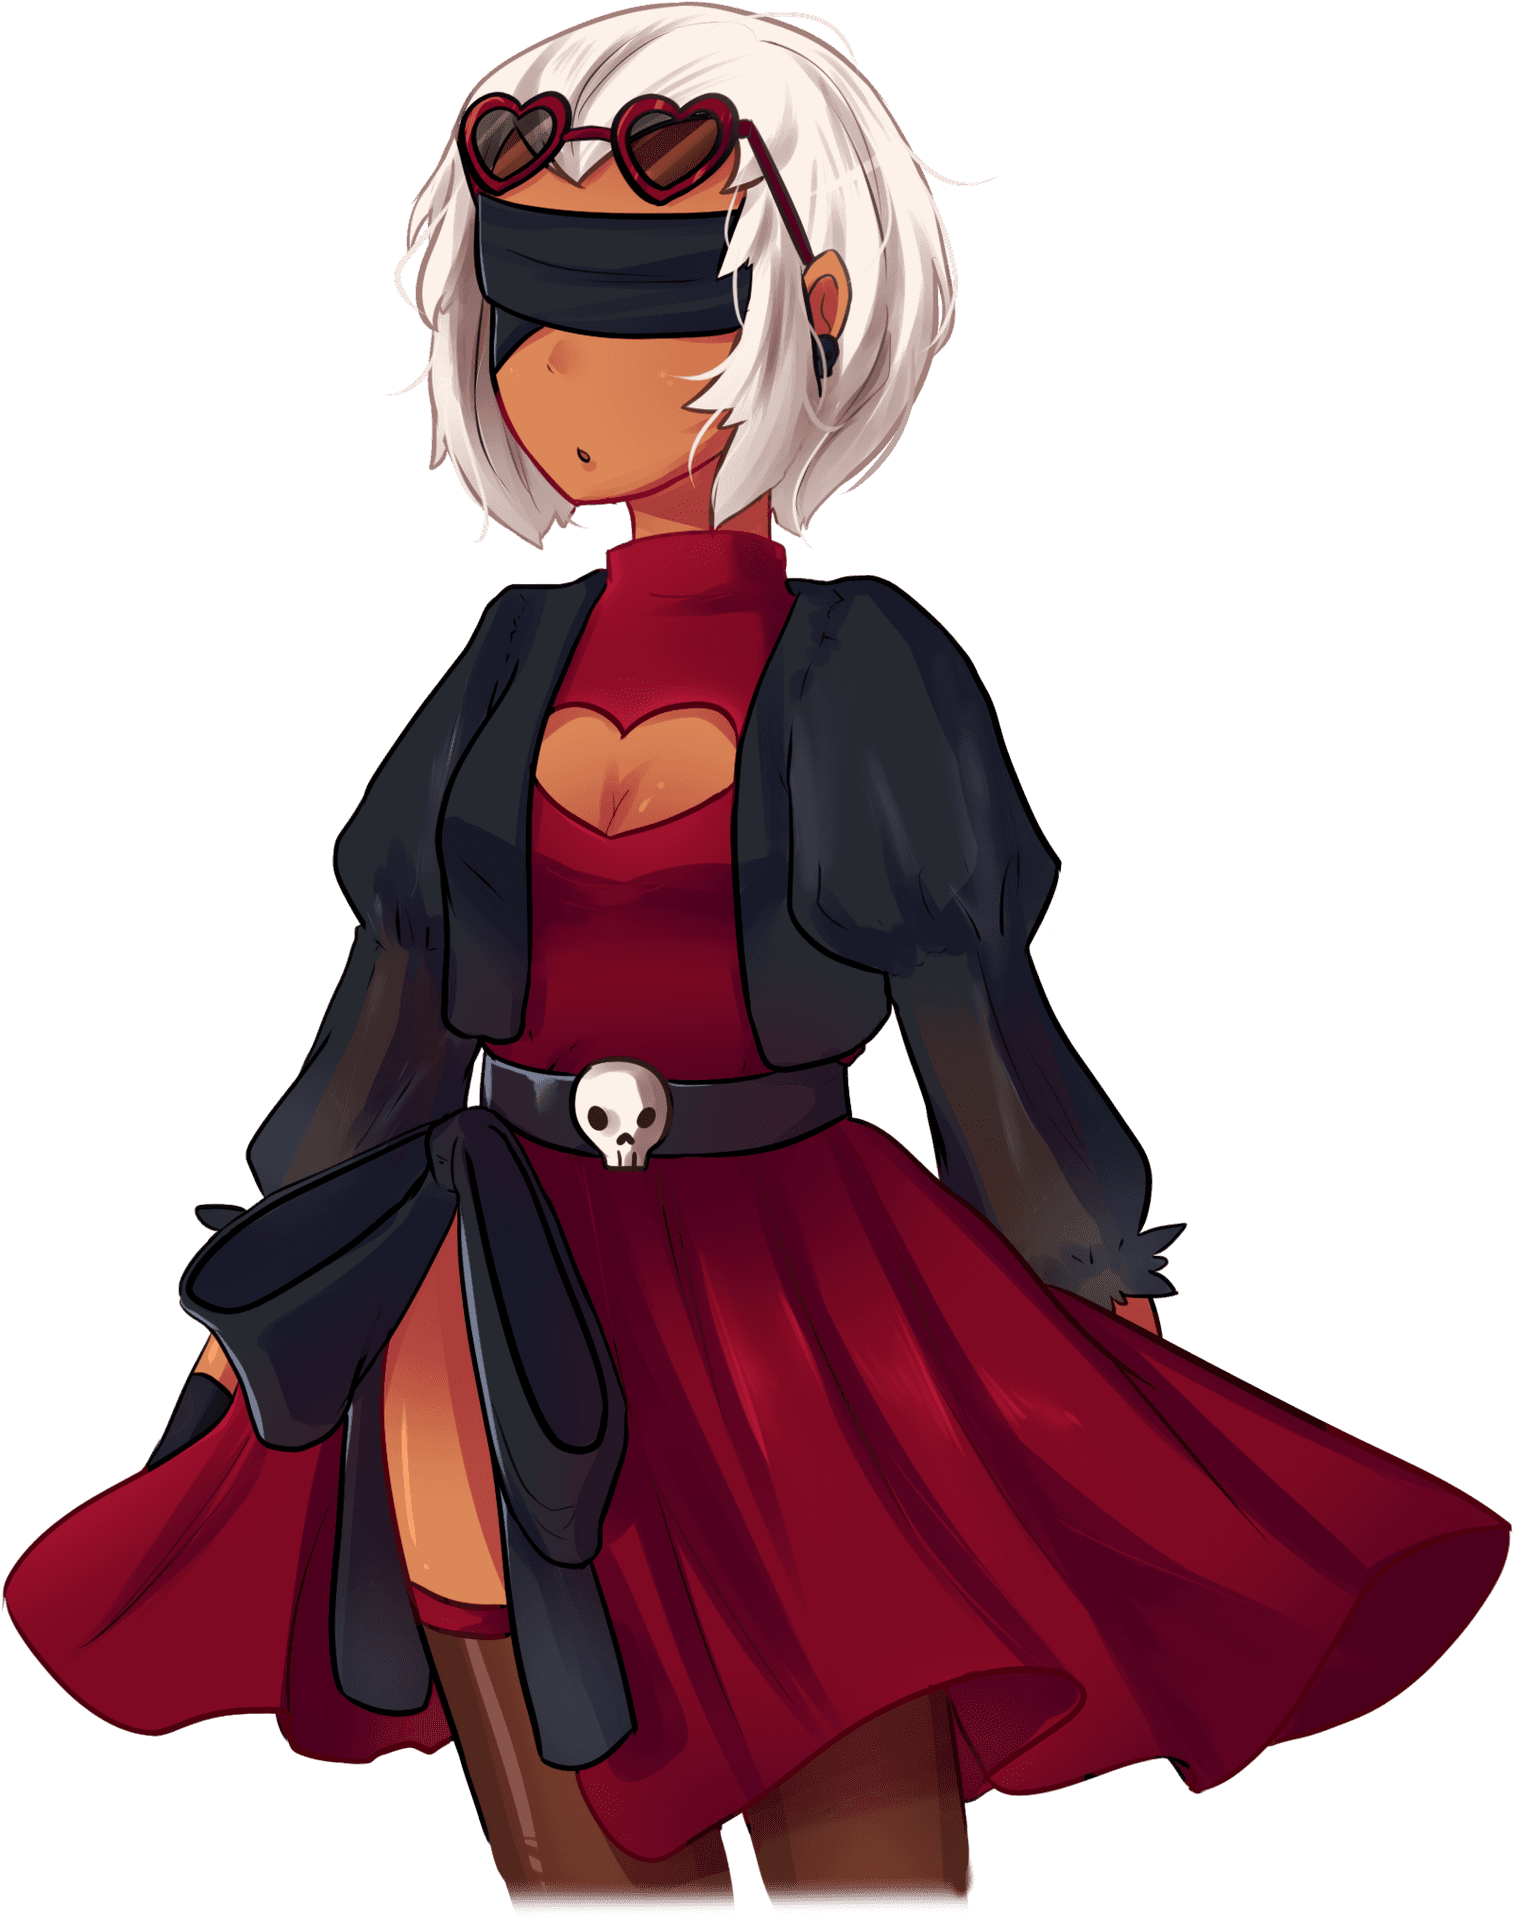 Stylish Anime Girlin Redand Black Outfit PNG